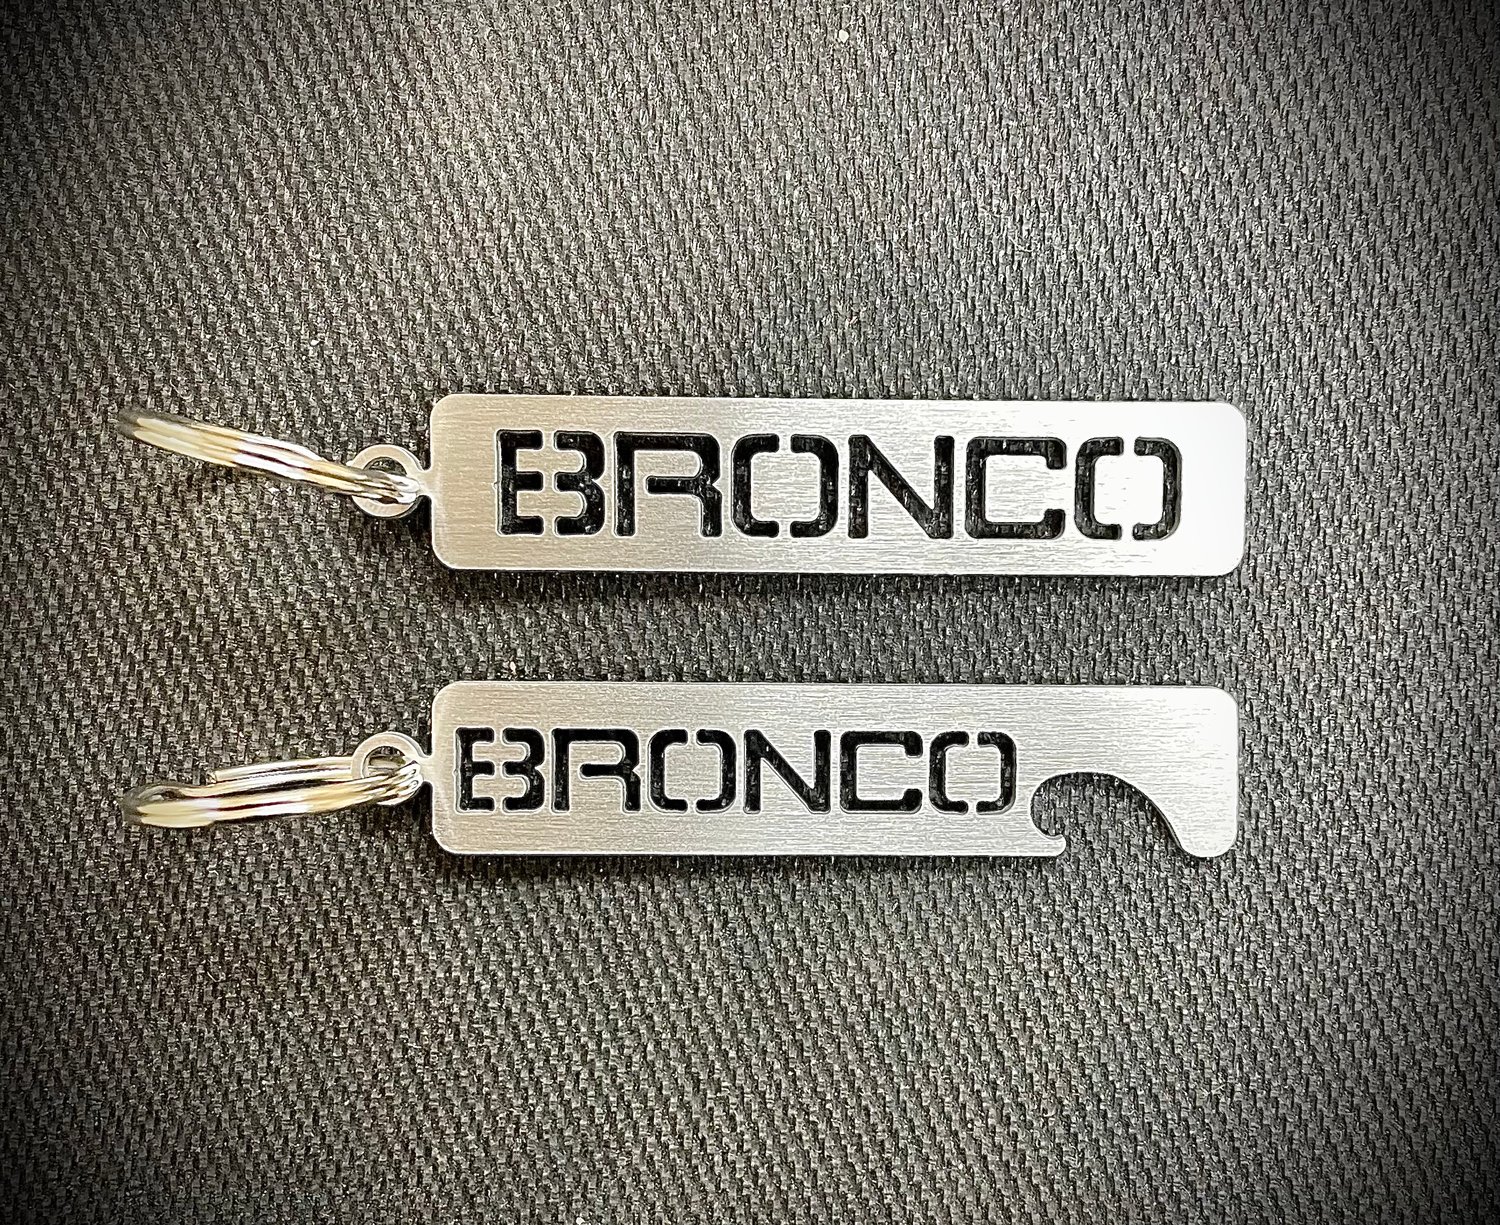 For Mid Gen Bronco Enthusiasts